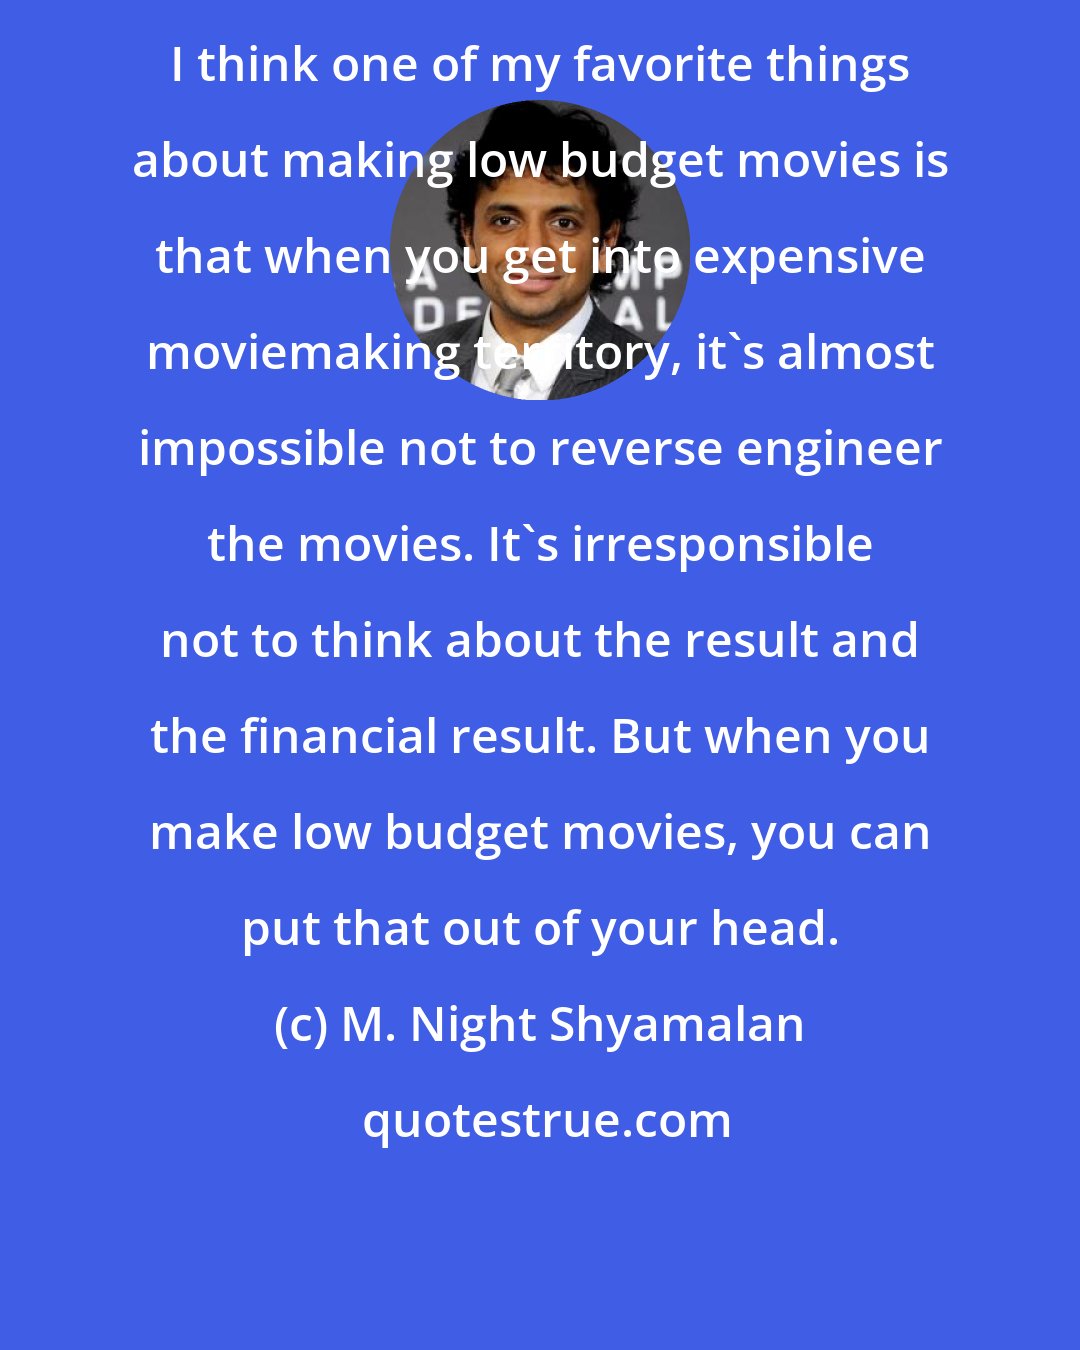 M. Night Shyamalan: I think one of my favorite things about making low budget movies is that when you get into expensive moviemaking territory, it's almost impossible not to reverse engineer the movies. It's irresponsible not to think about the result and the financial result. But when you make low budget movies, you can put that out of your head.